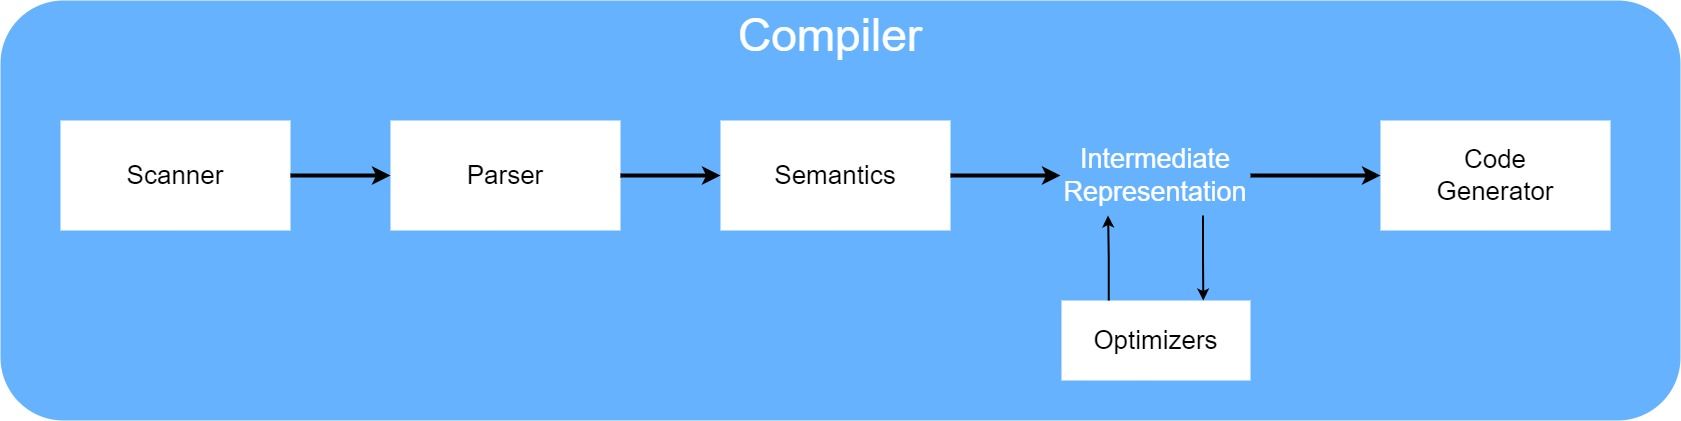 Compiler phases